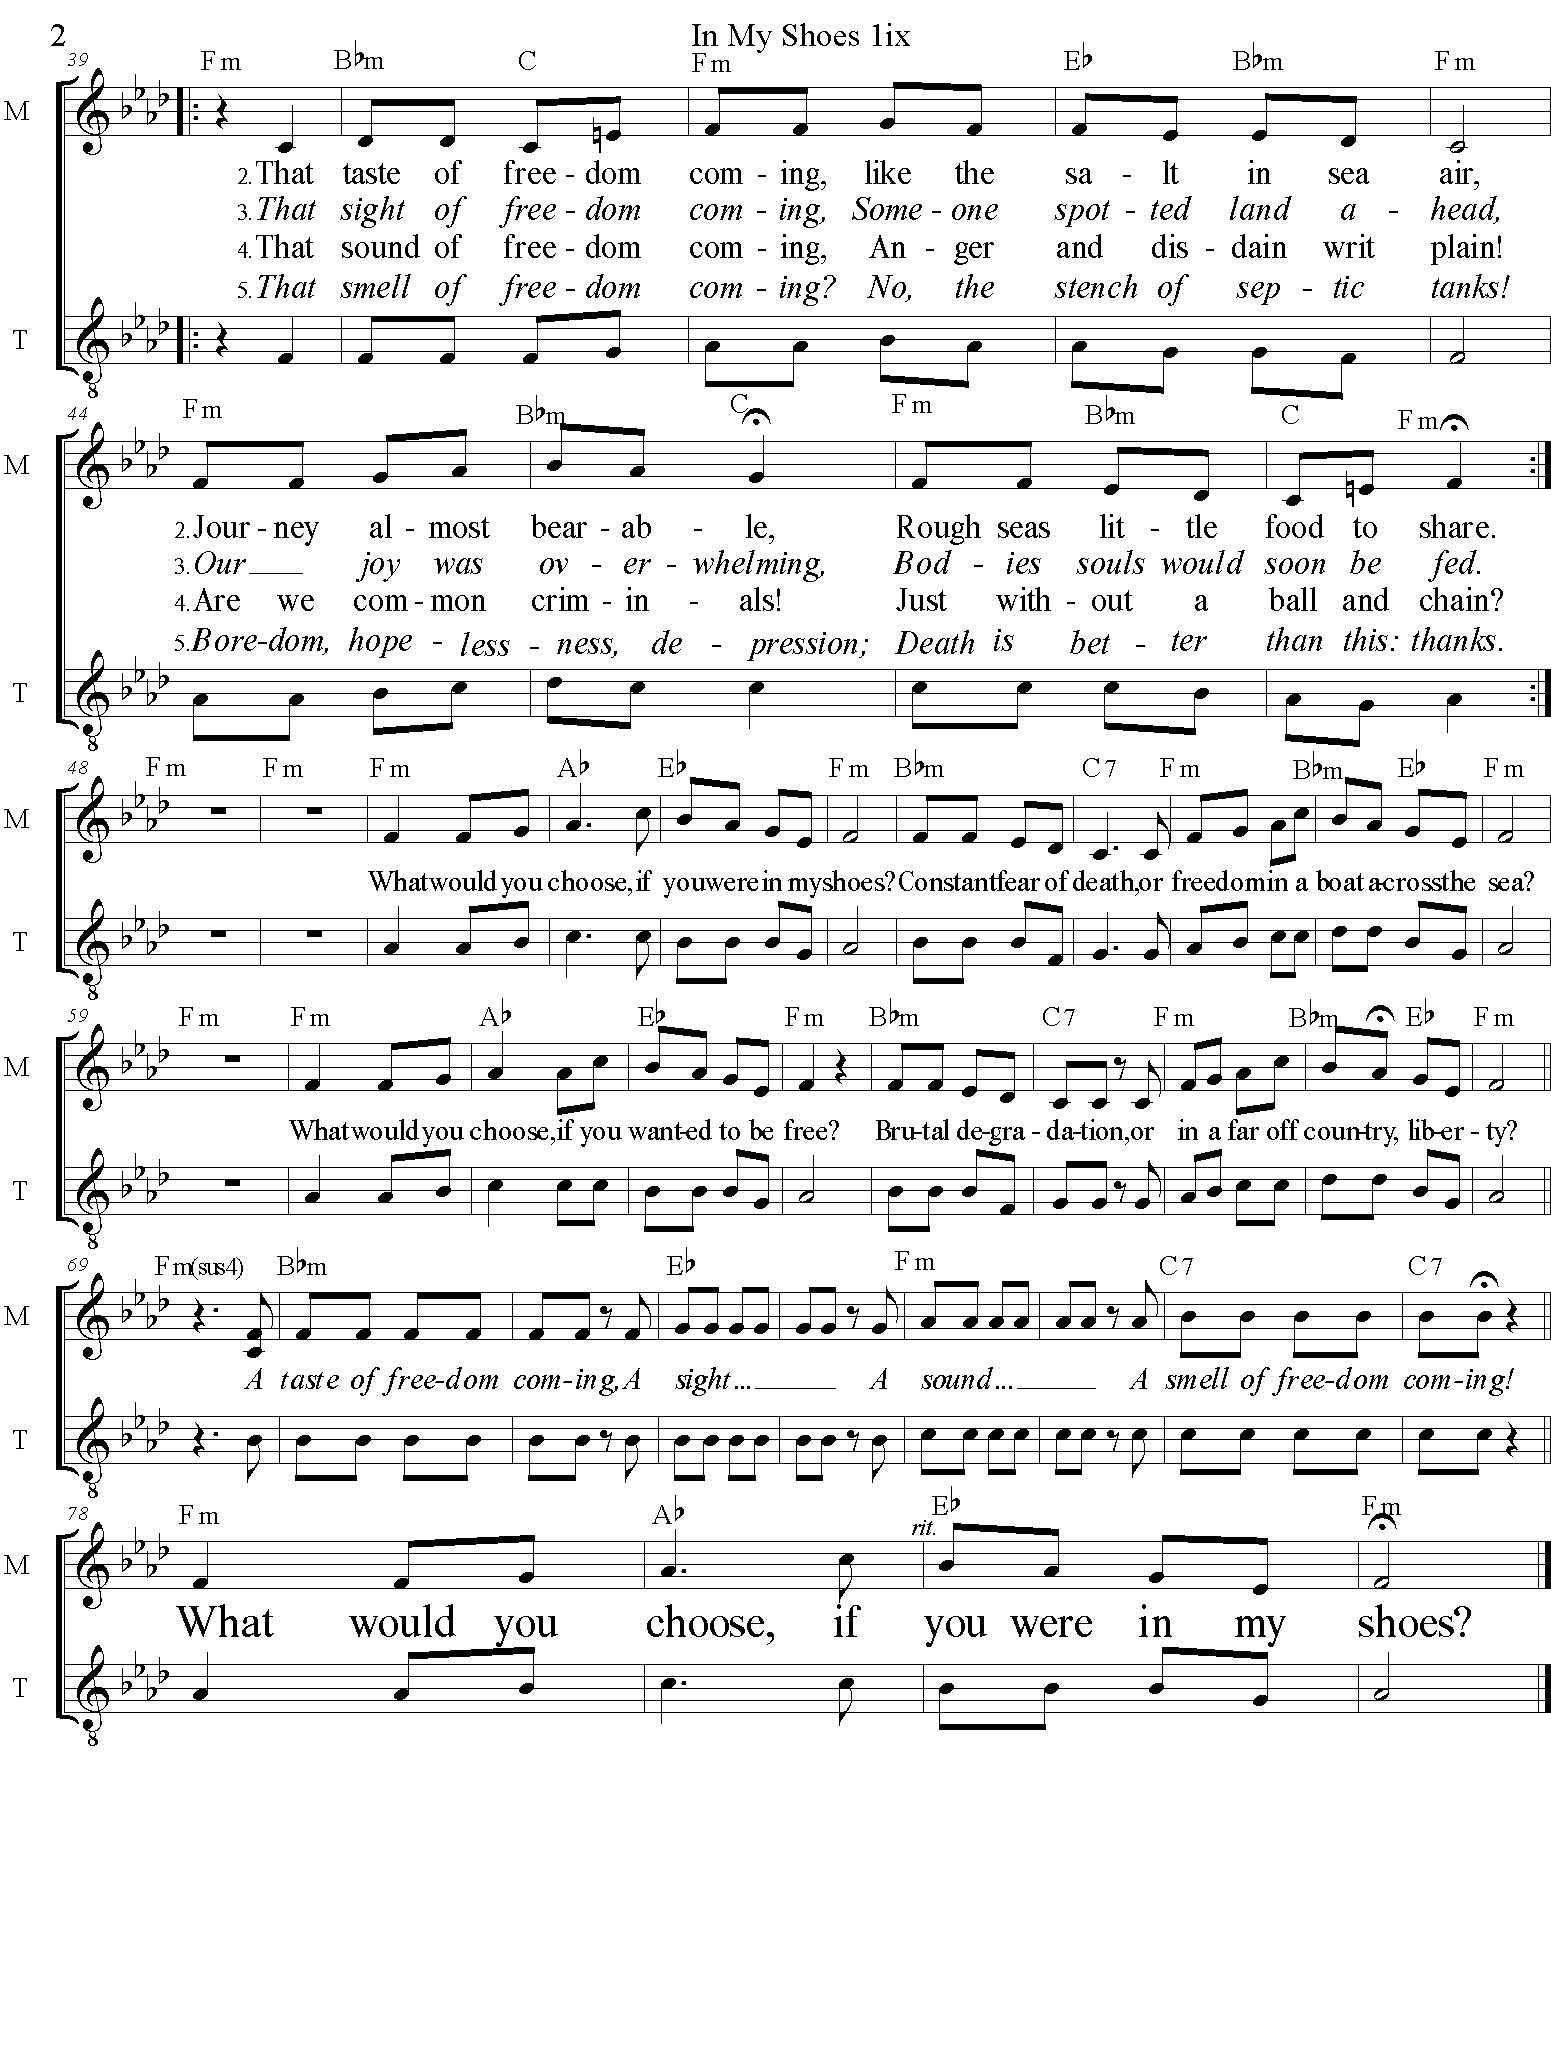 Im My Shoes Sheet Music Fm page 2